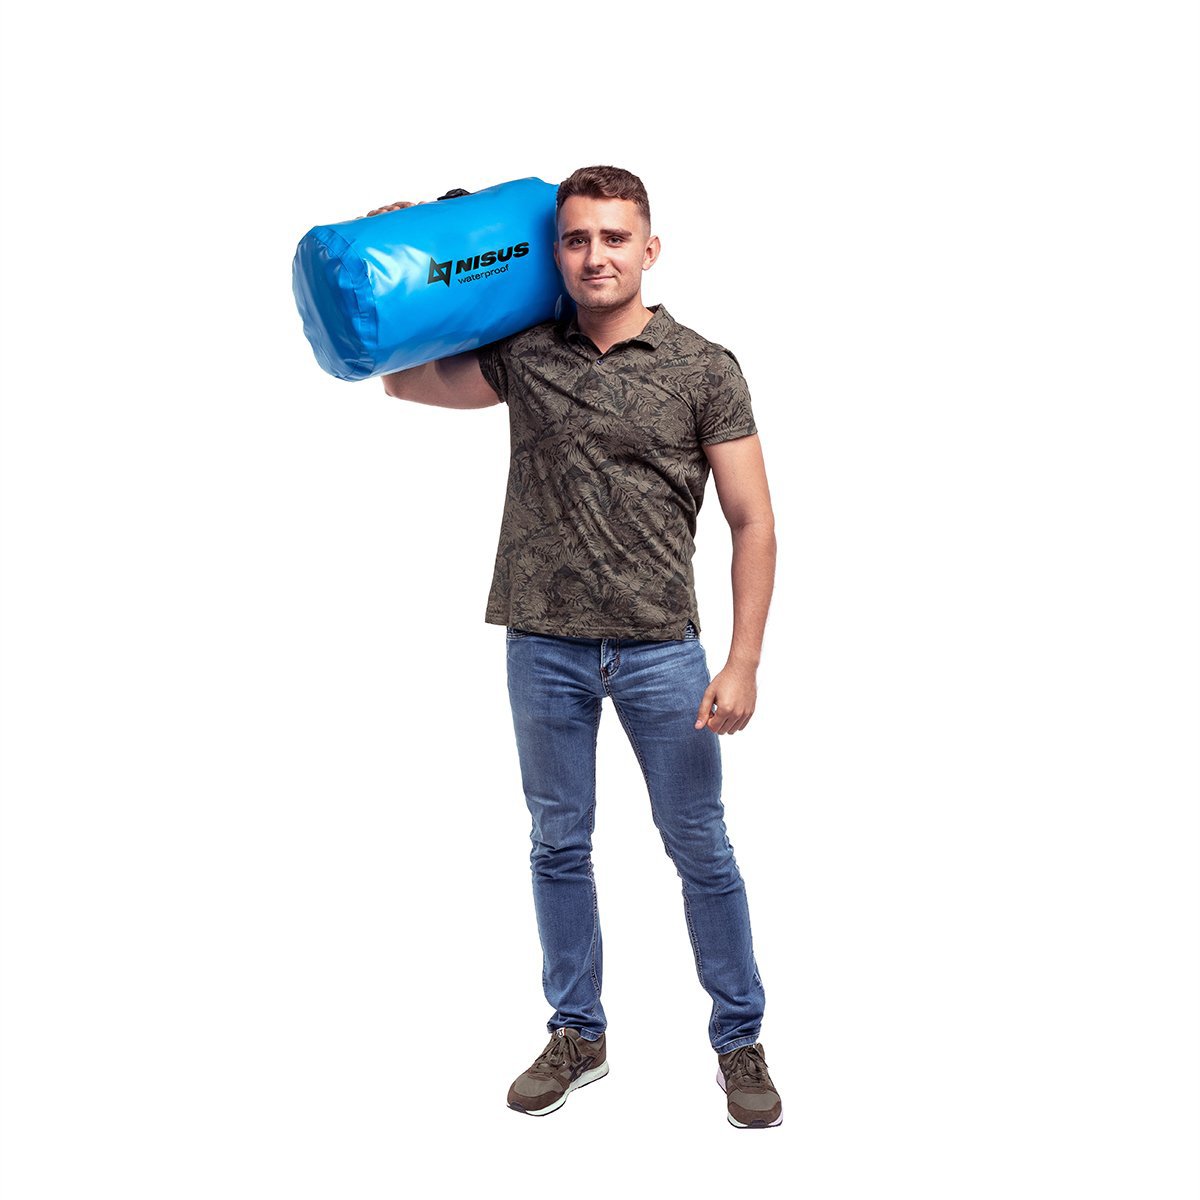 A man carrying a 30 L Blue Waterproof Compact Dry Bag